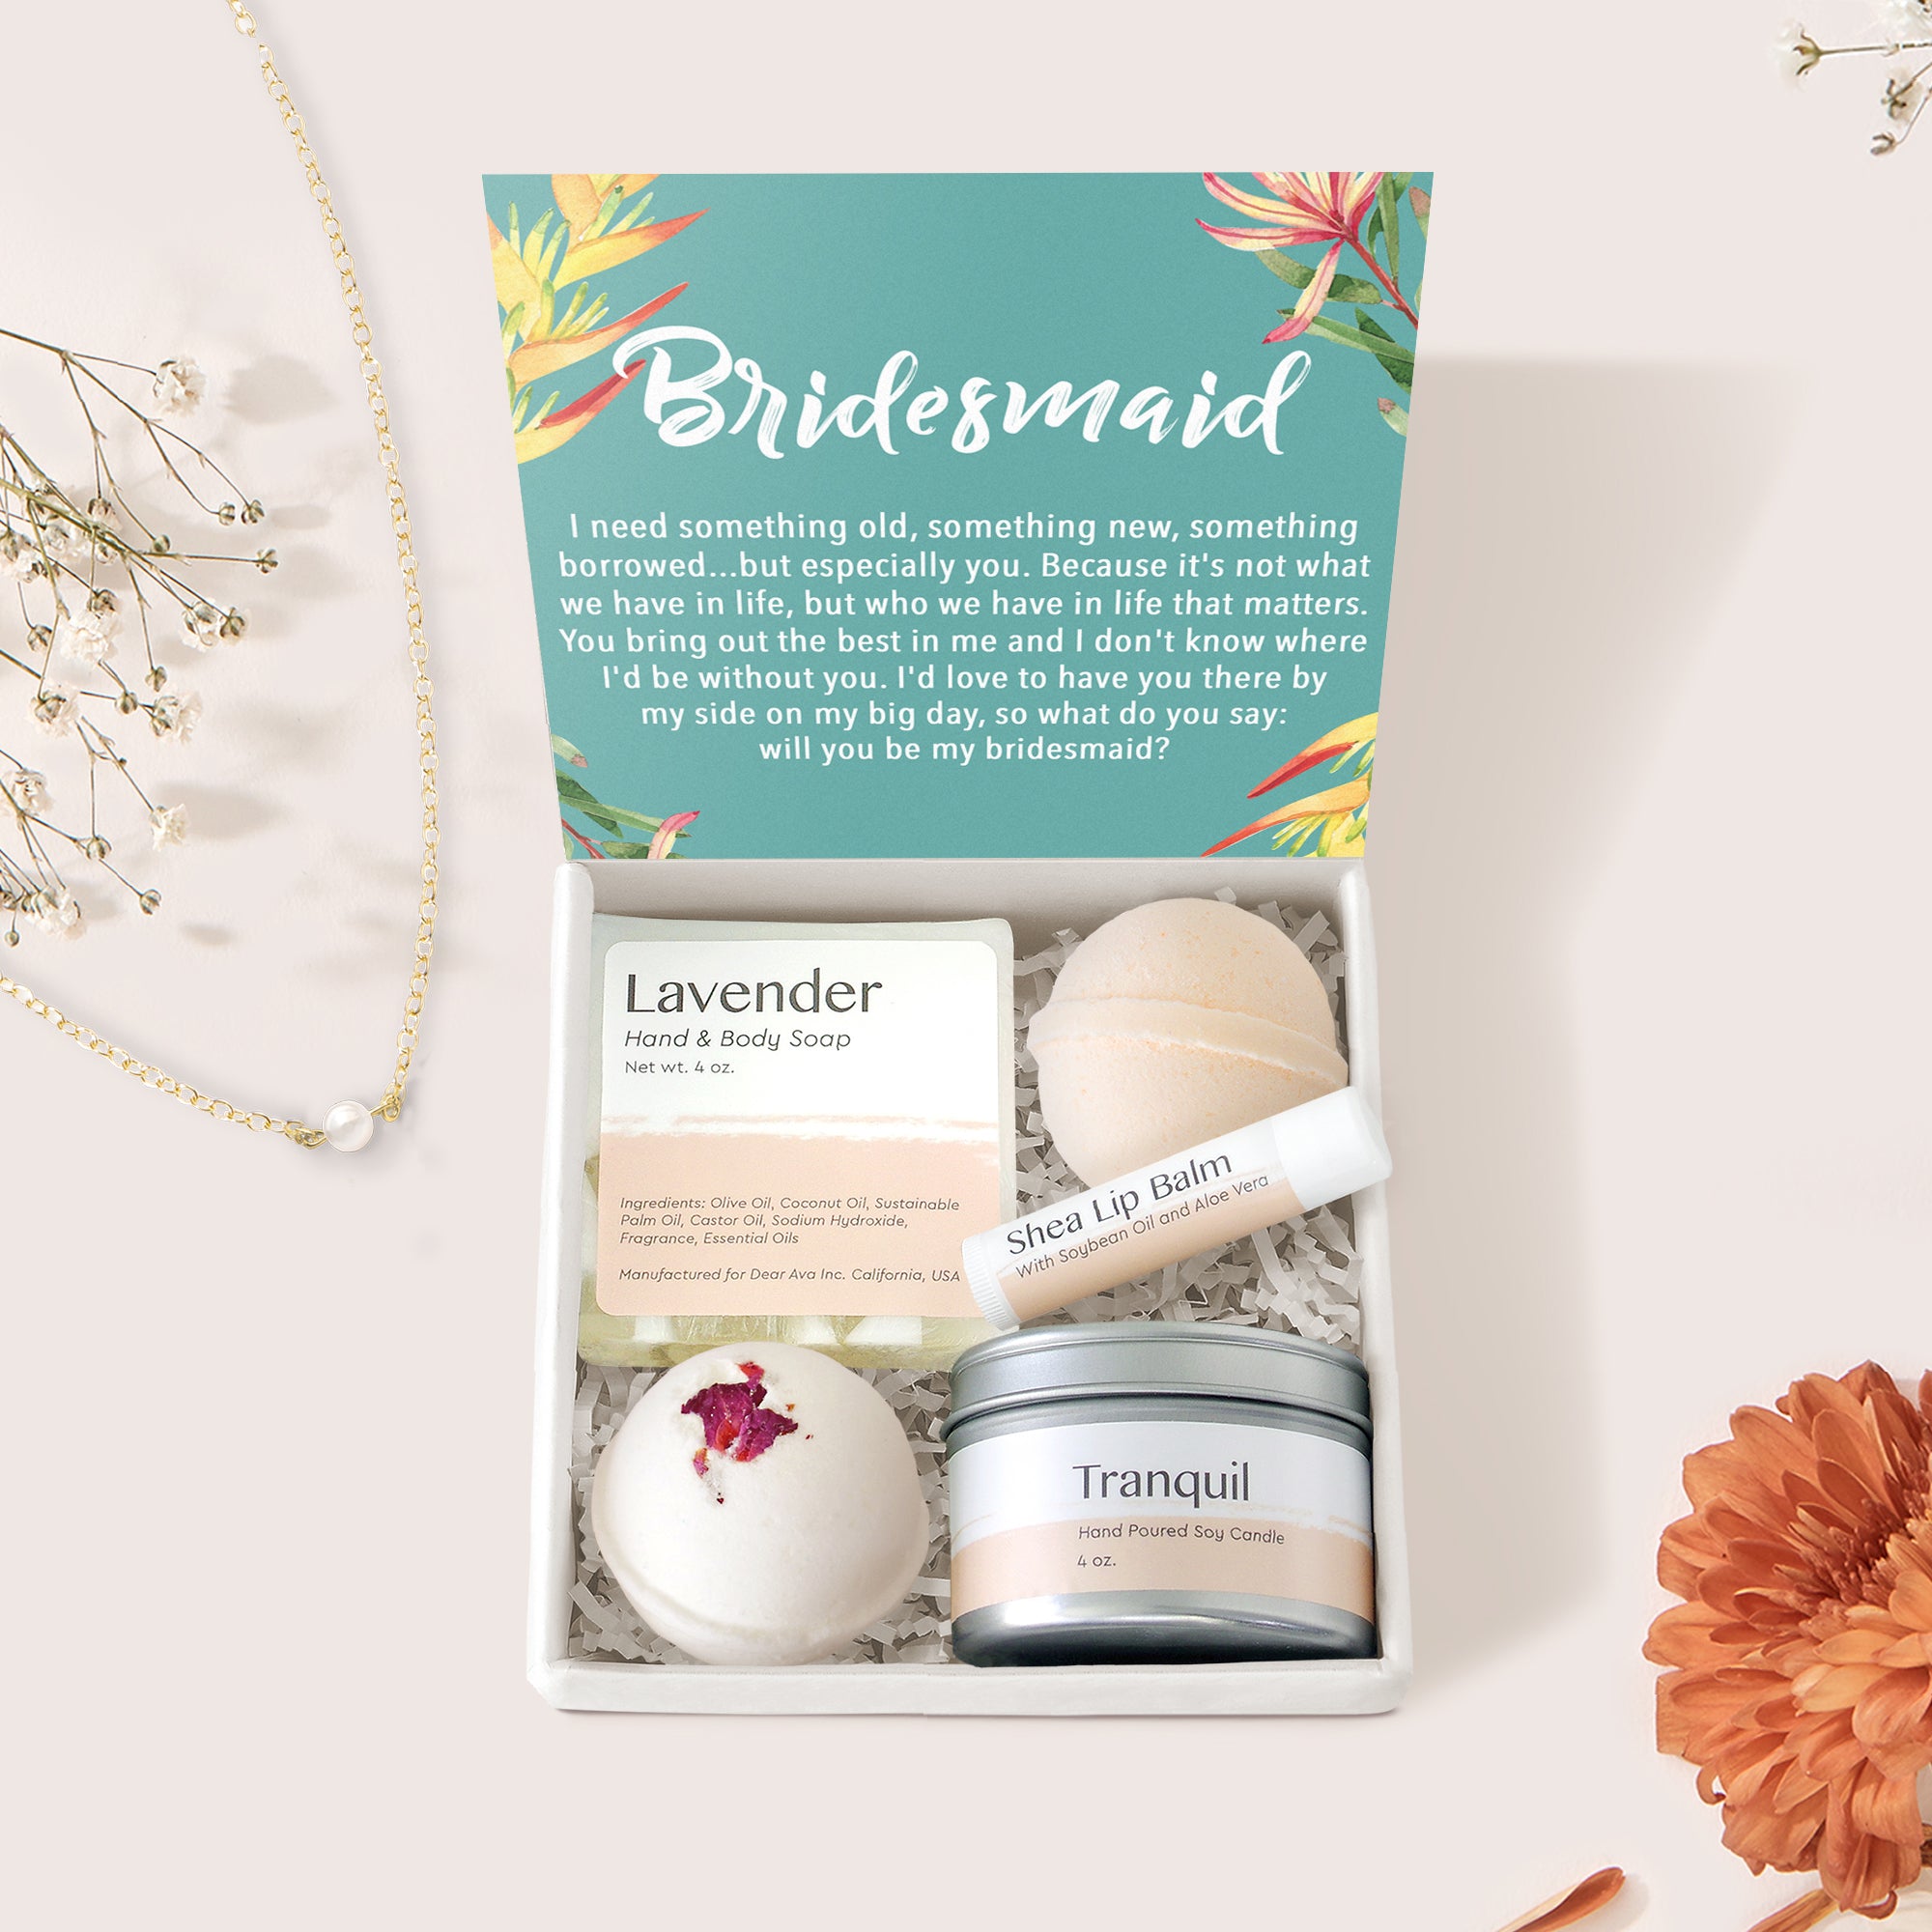 65+ Best Bridesmaid Gifts for the Bridal Party » All Gifts Considered